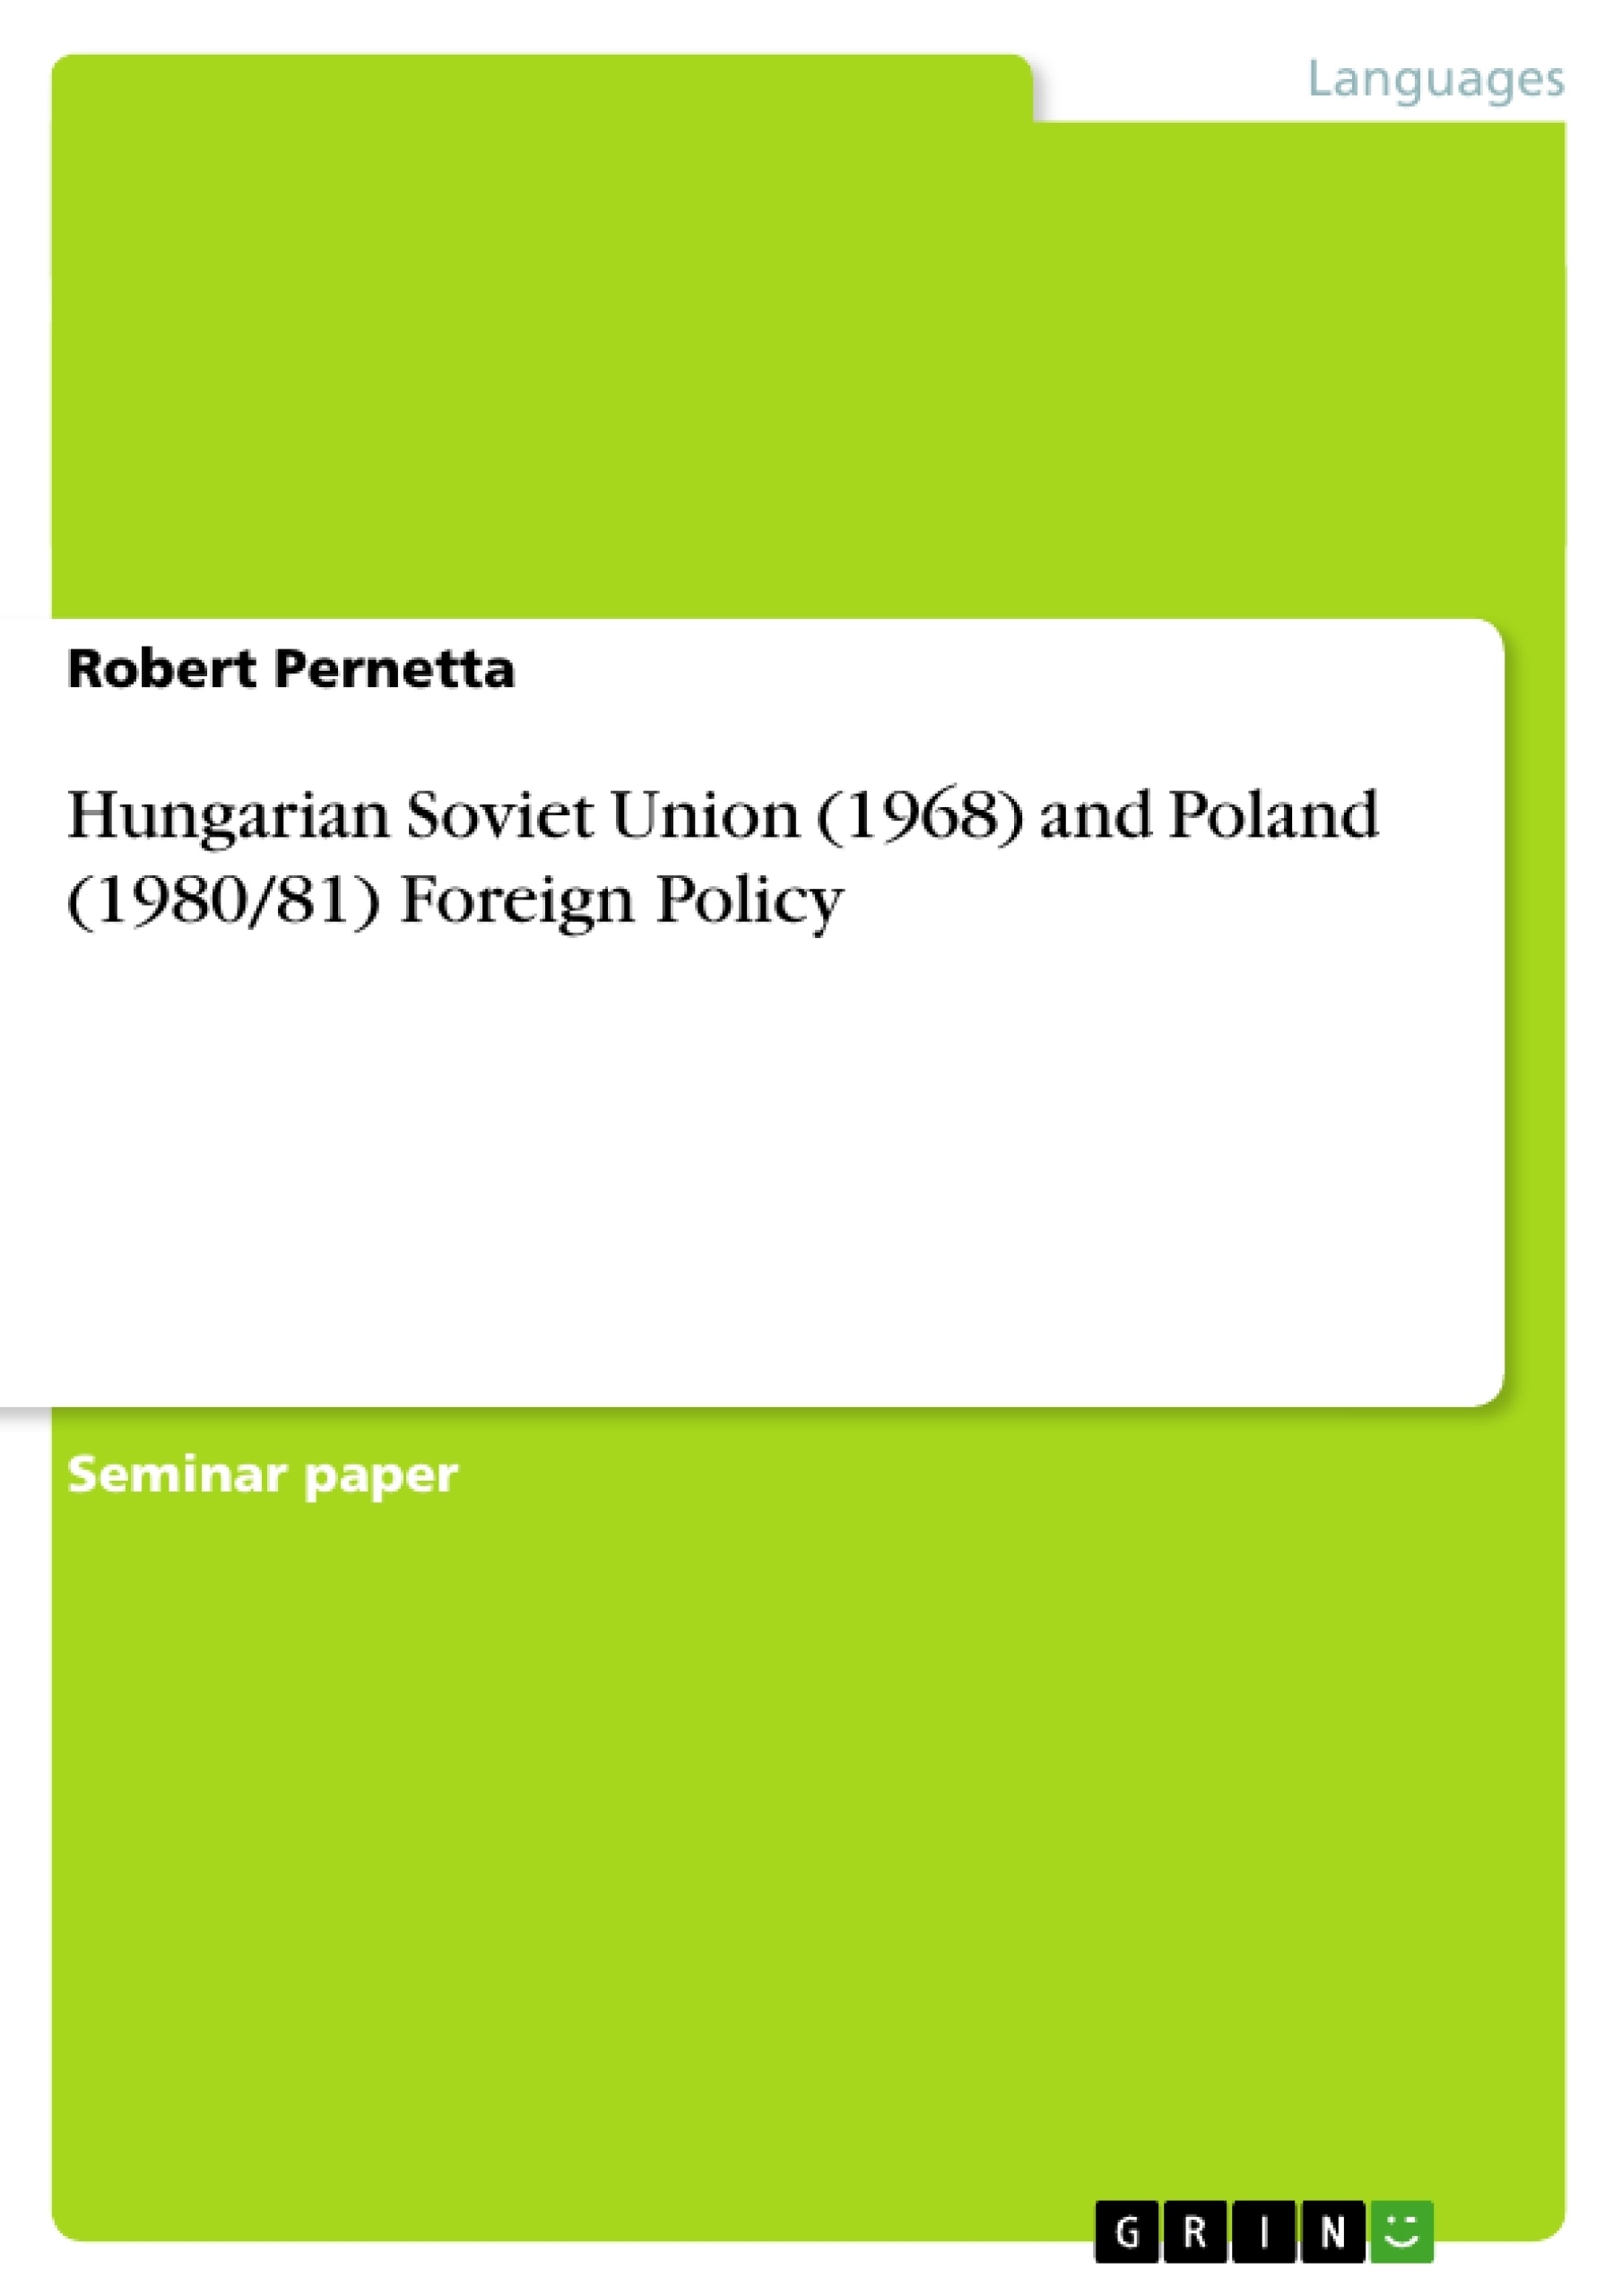 Titre: Hungarian Soviet Union (1968) and Poland (1980/81) Foreign Policy